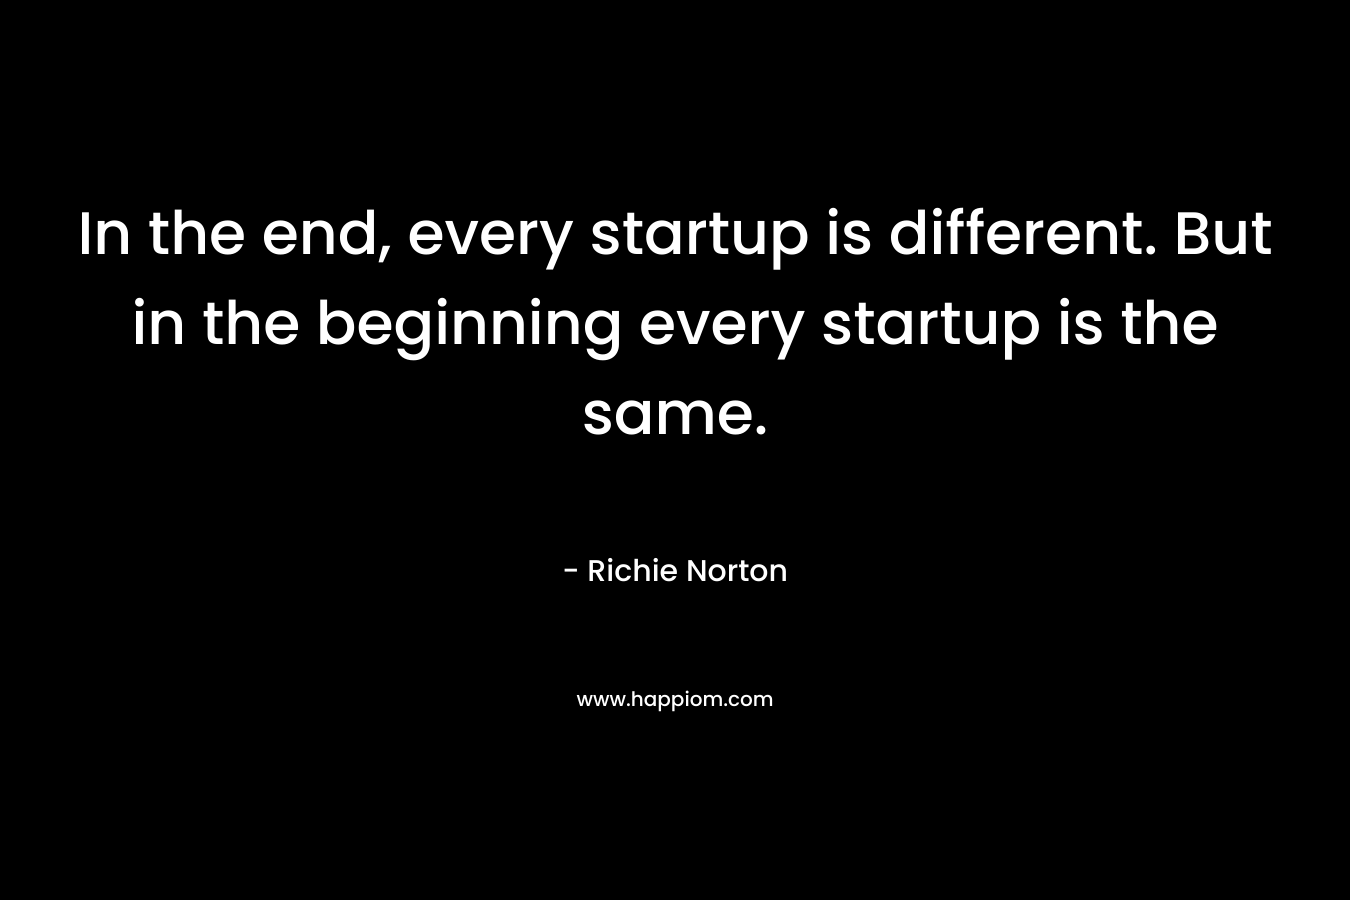 In the end, every startup is different. But in the beginning every startup is the same. – Richie Norton